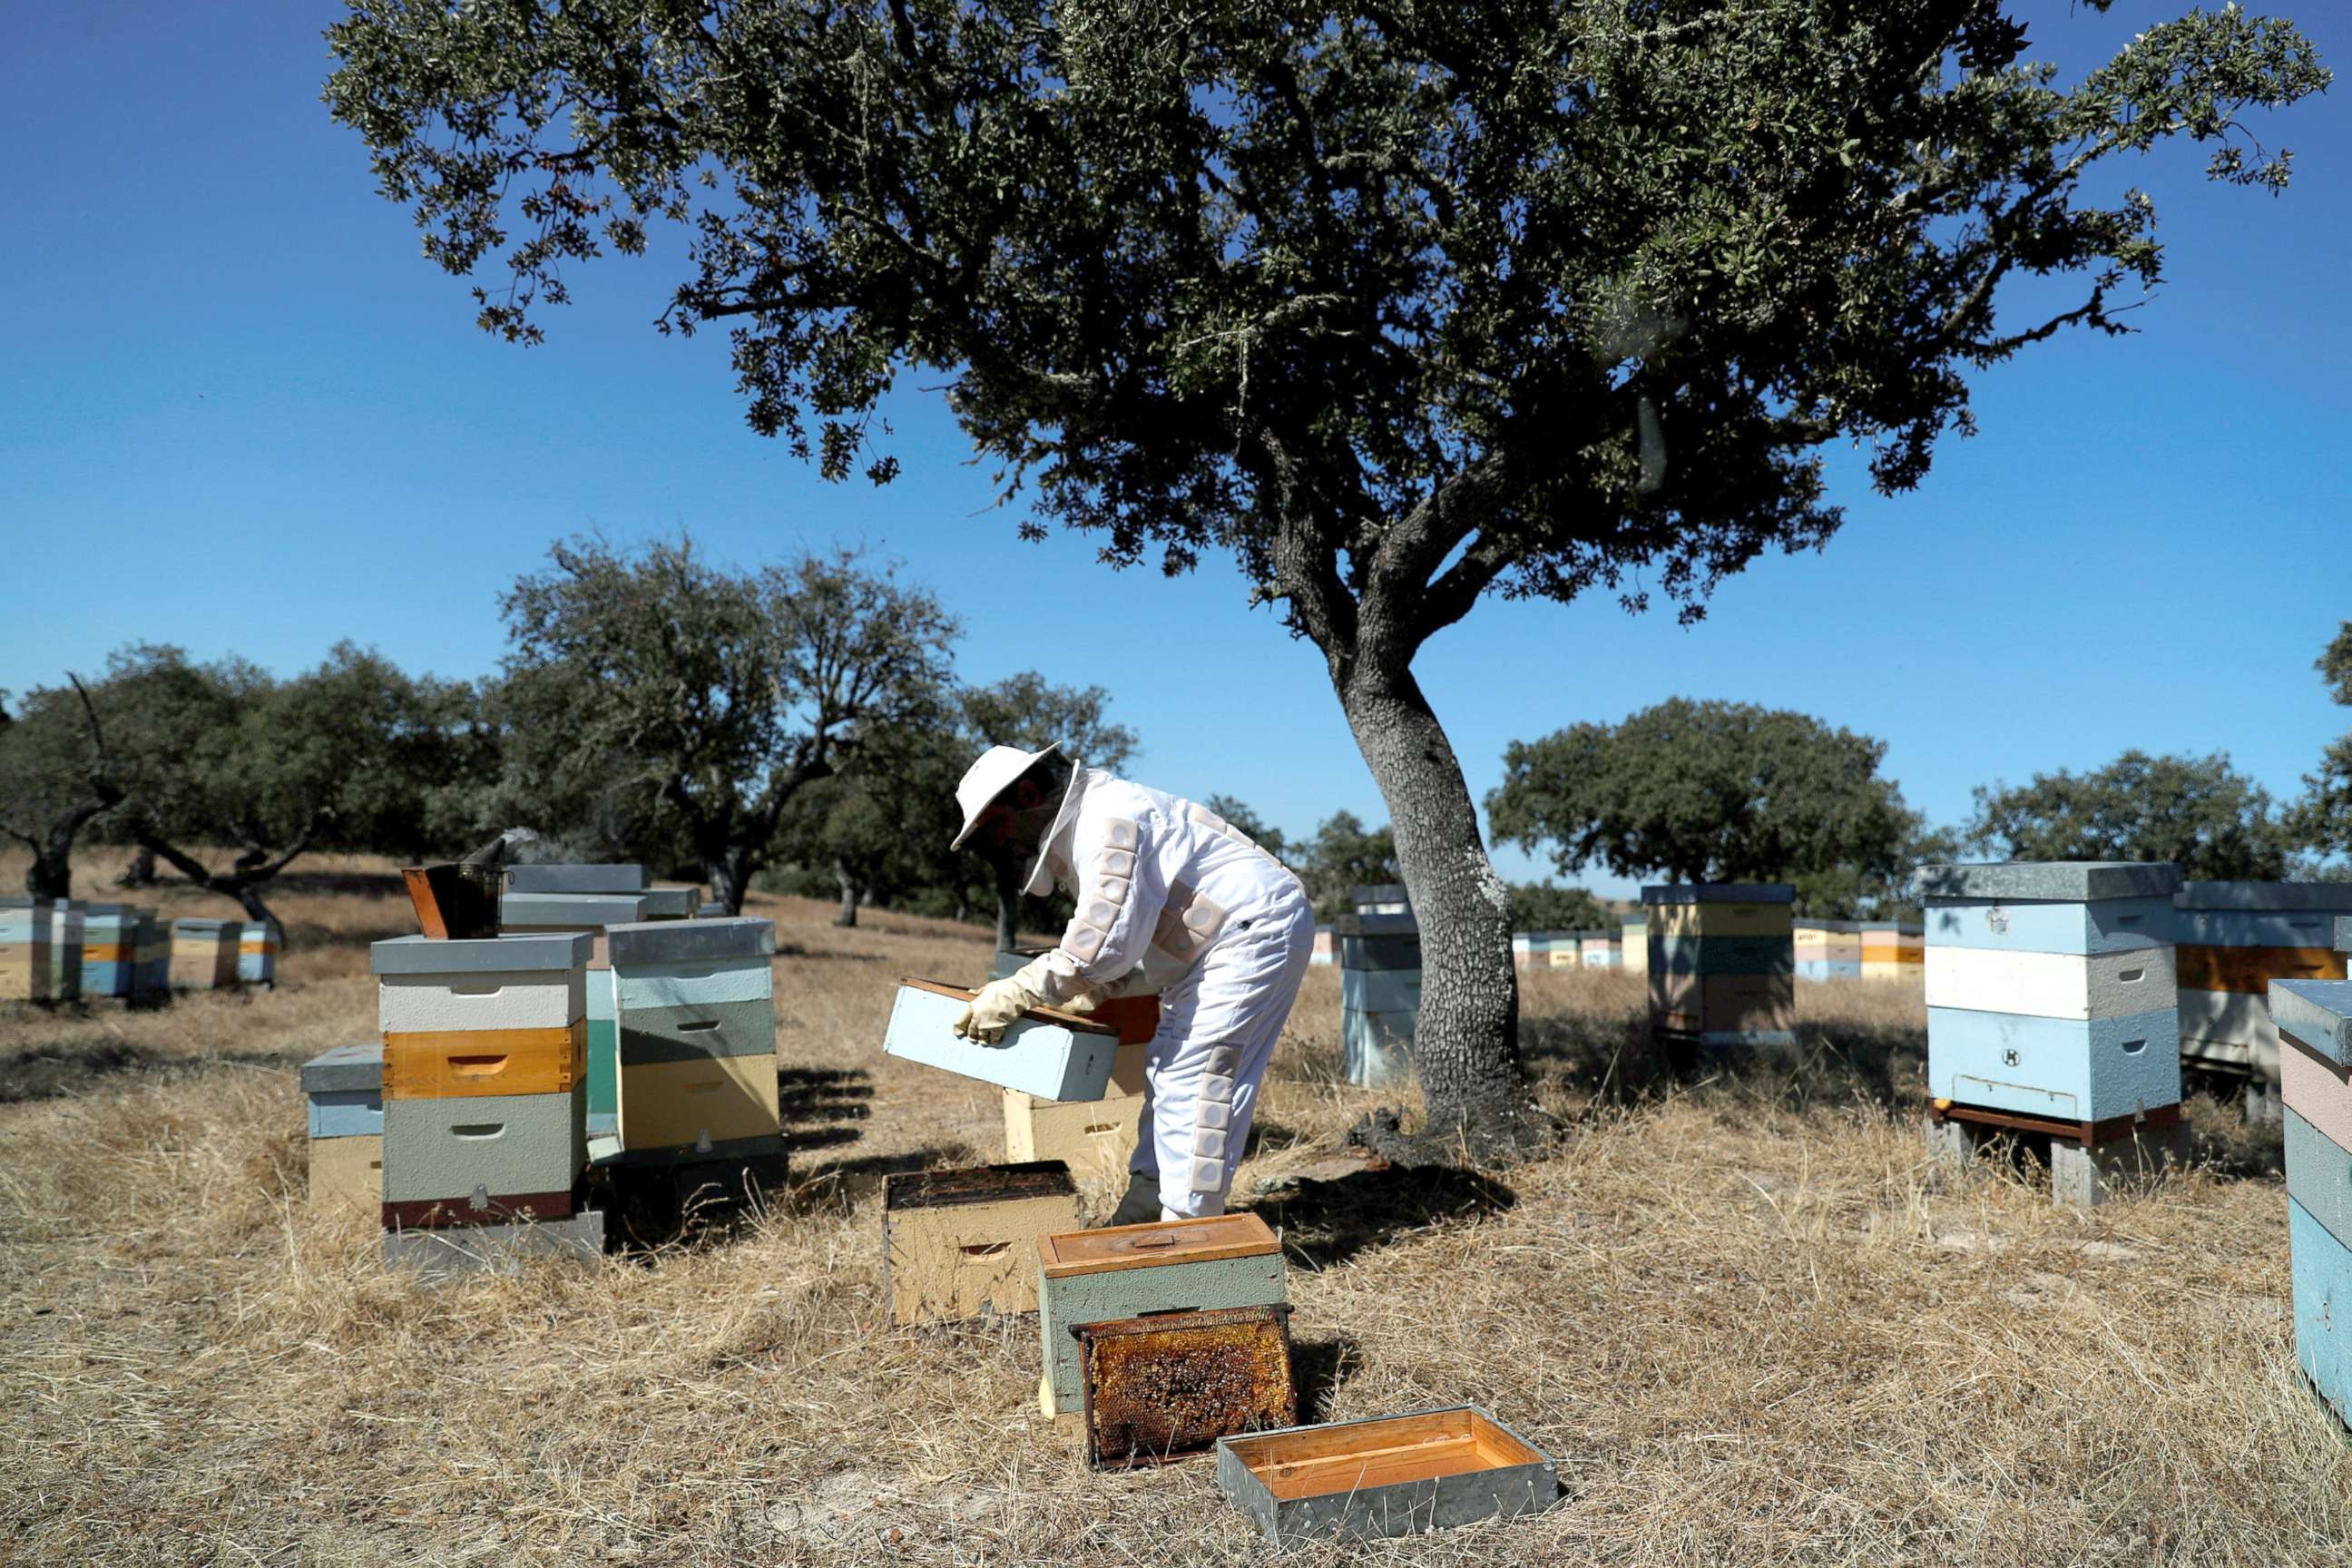 PHOTO: Beekeeper Helder Martins looks at a hive on a farm where his bees pollinate the trees near Pias, Portugal, Aug. 10, 2018.